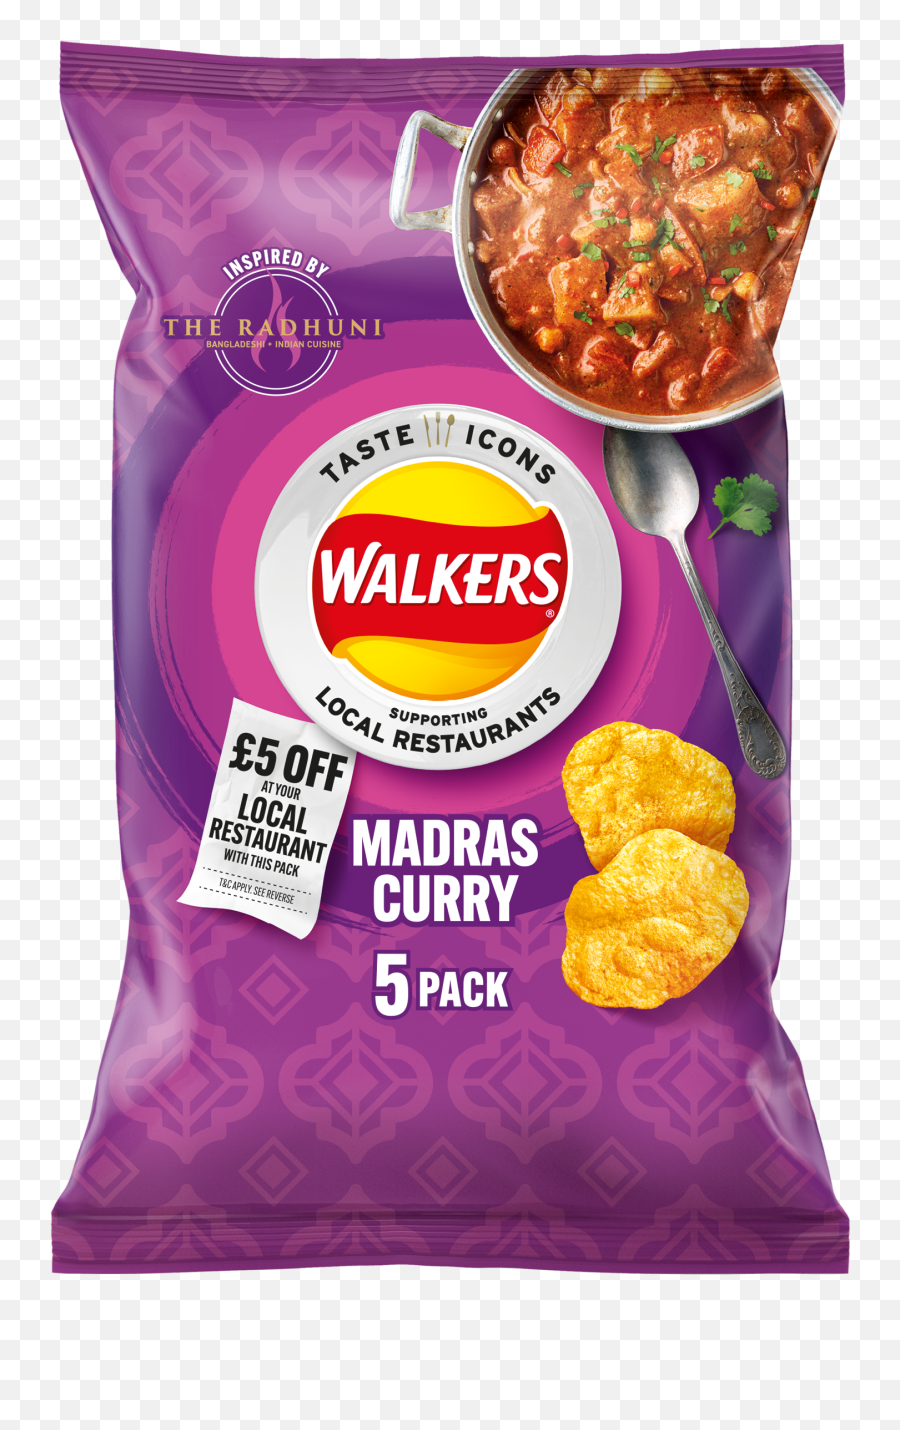 Splendid Communications And Walkers Launch U0027taste Icons - Fish And Chip Flavour Crisps Walkers Png,Curry Icon